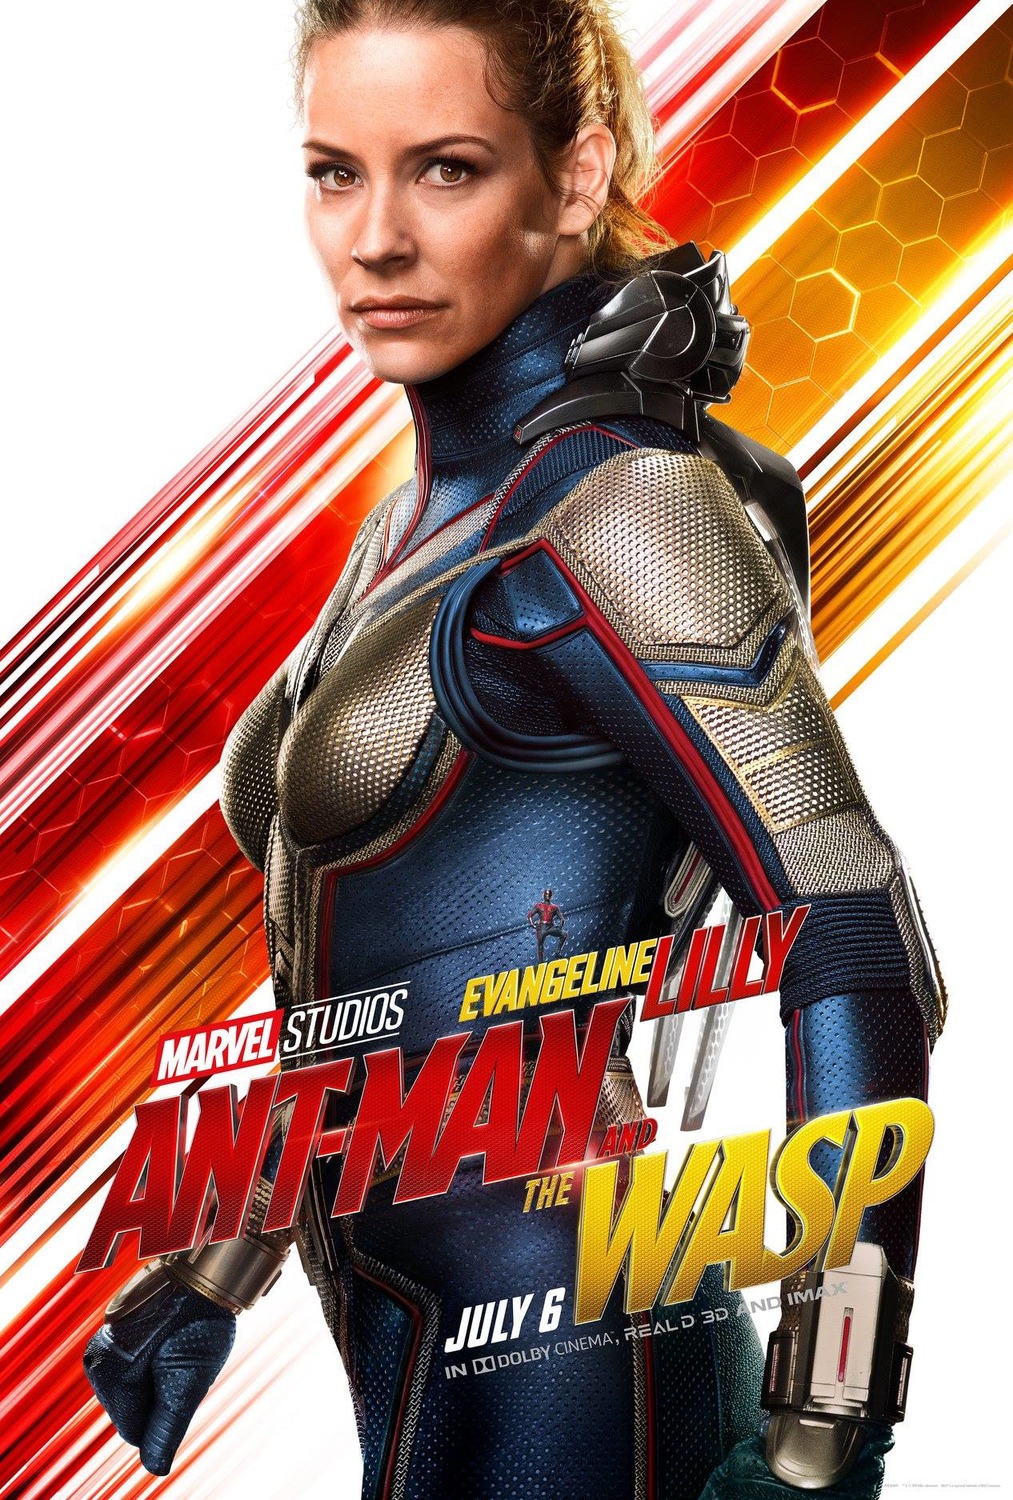 Ant-Man': 7 EW Exclusive New Character Posters